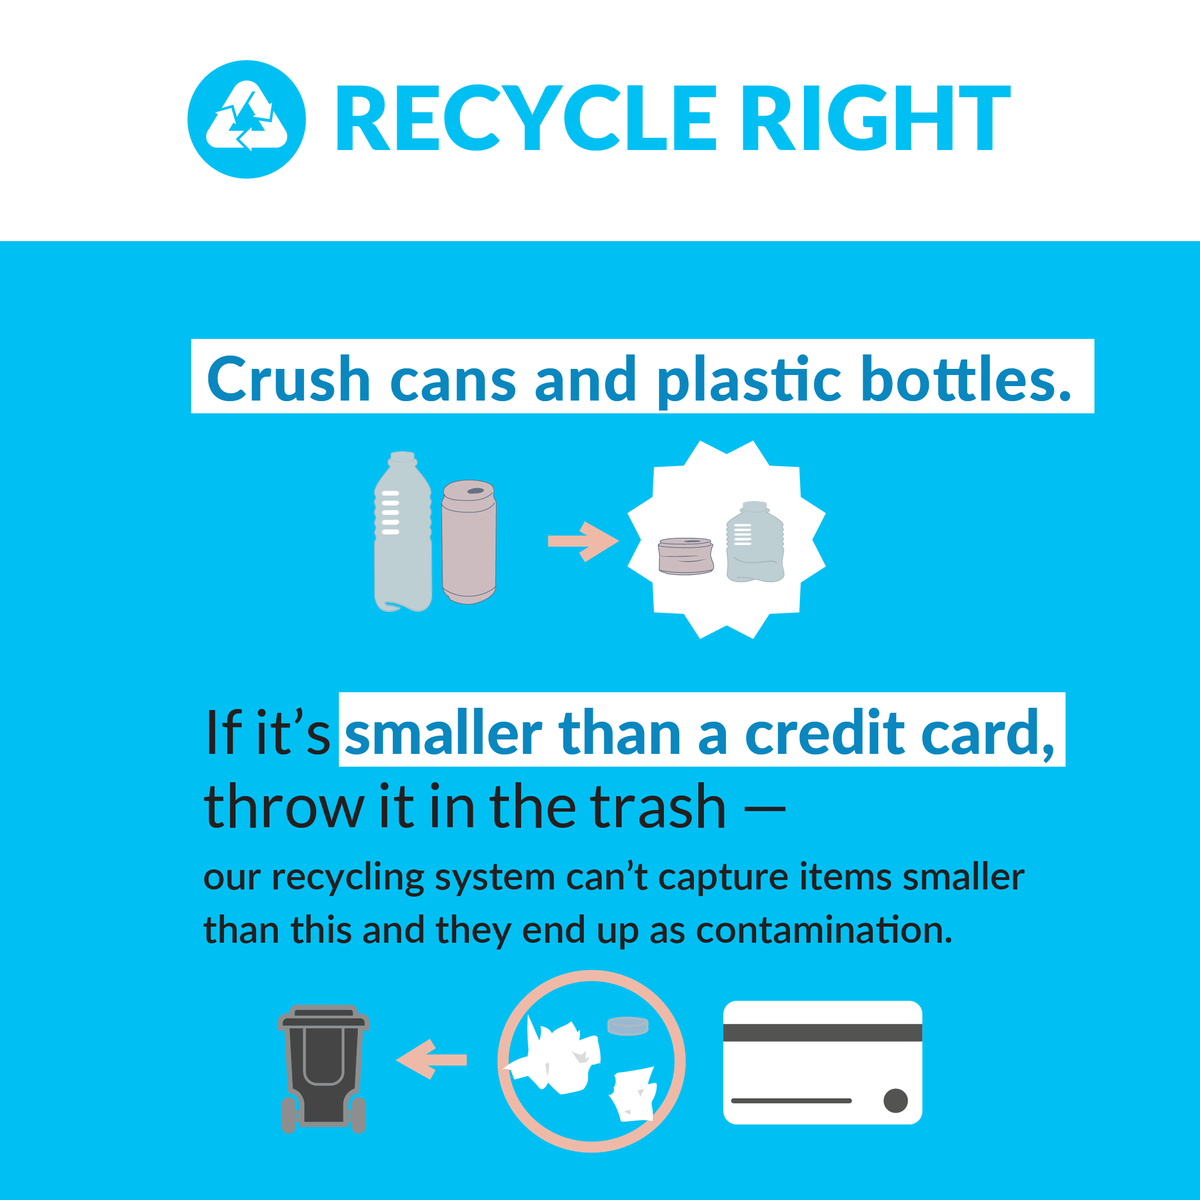 We have two recycling tips for you this Tuesday! ♻️ Crush cans and plastic bottles to help save space in your bin. ♻️ Don’t be a wishcycler! If an item is smaller than a credit card, put it in the trash instead.